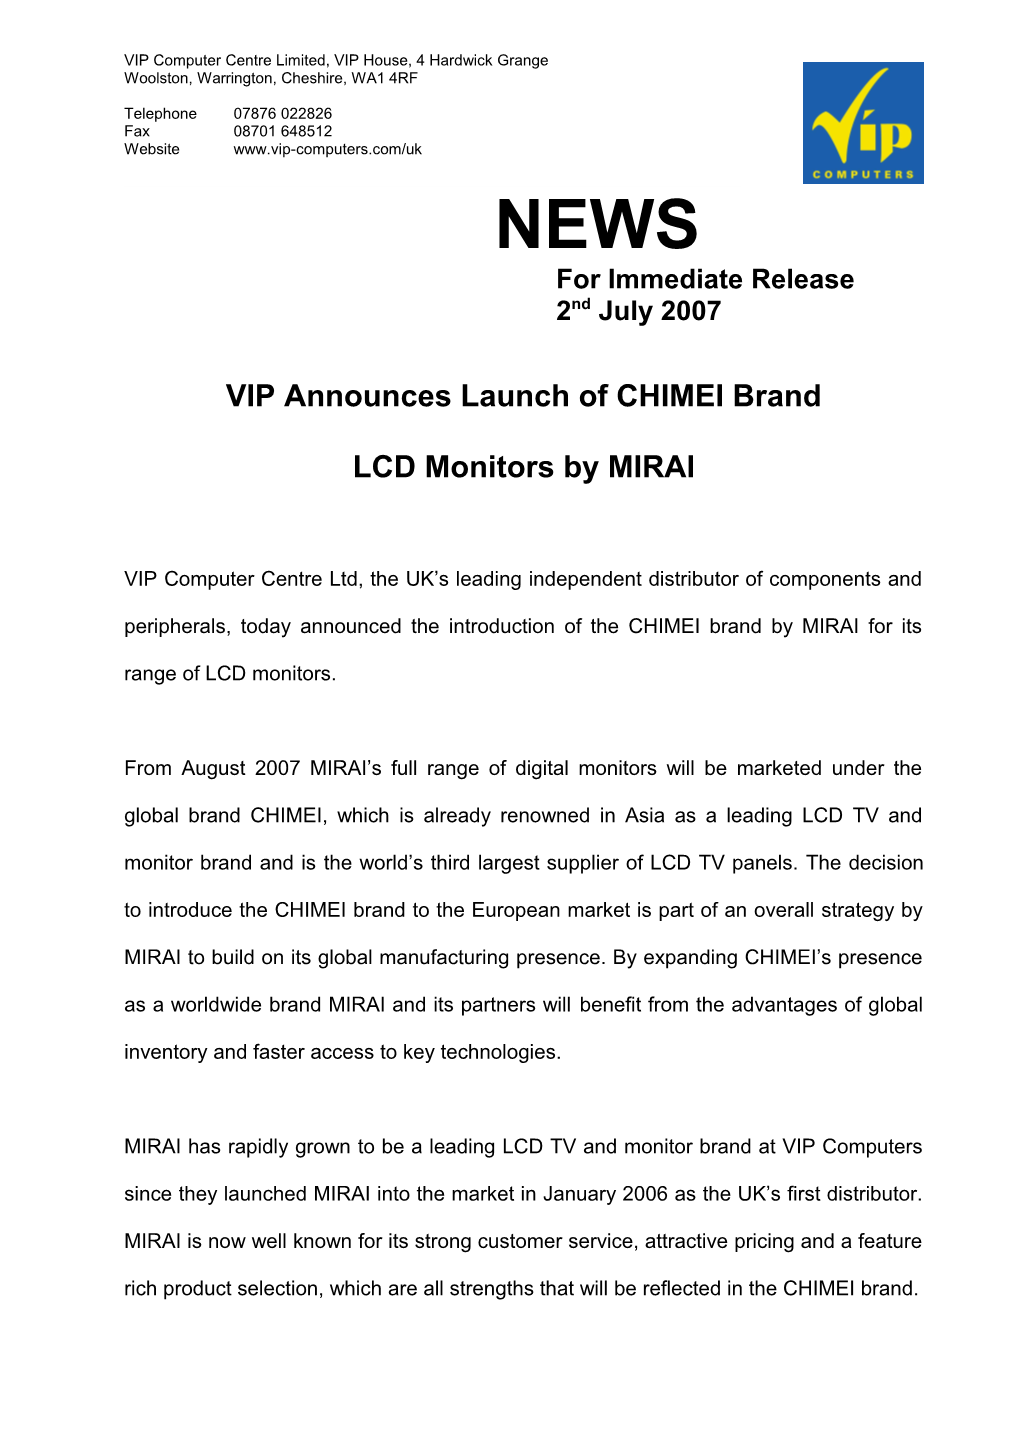 VIP Announces Launch of CHIMEI Brand LCD Monitors by MIRAI